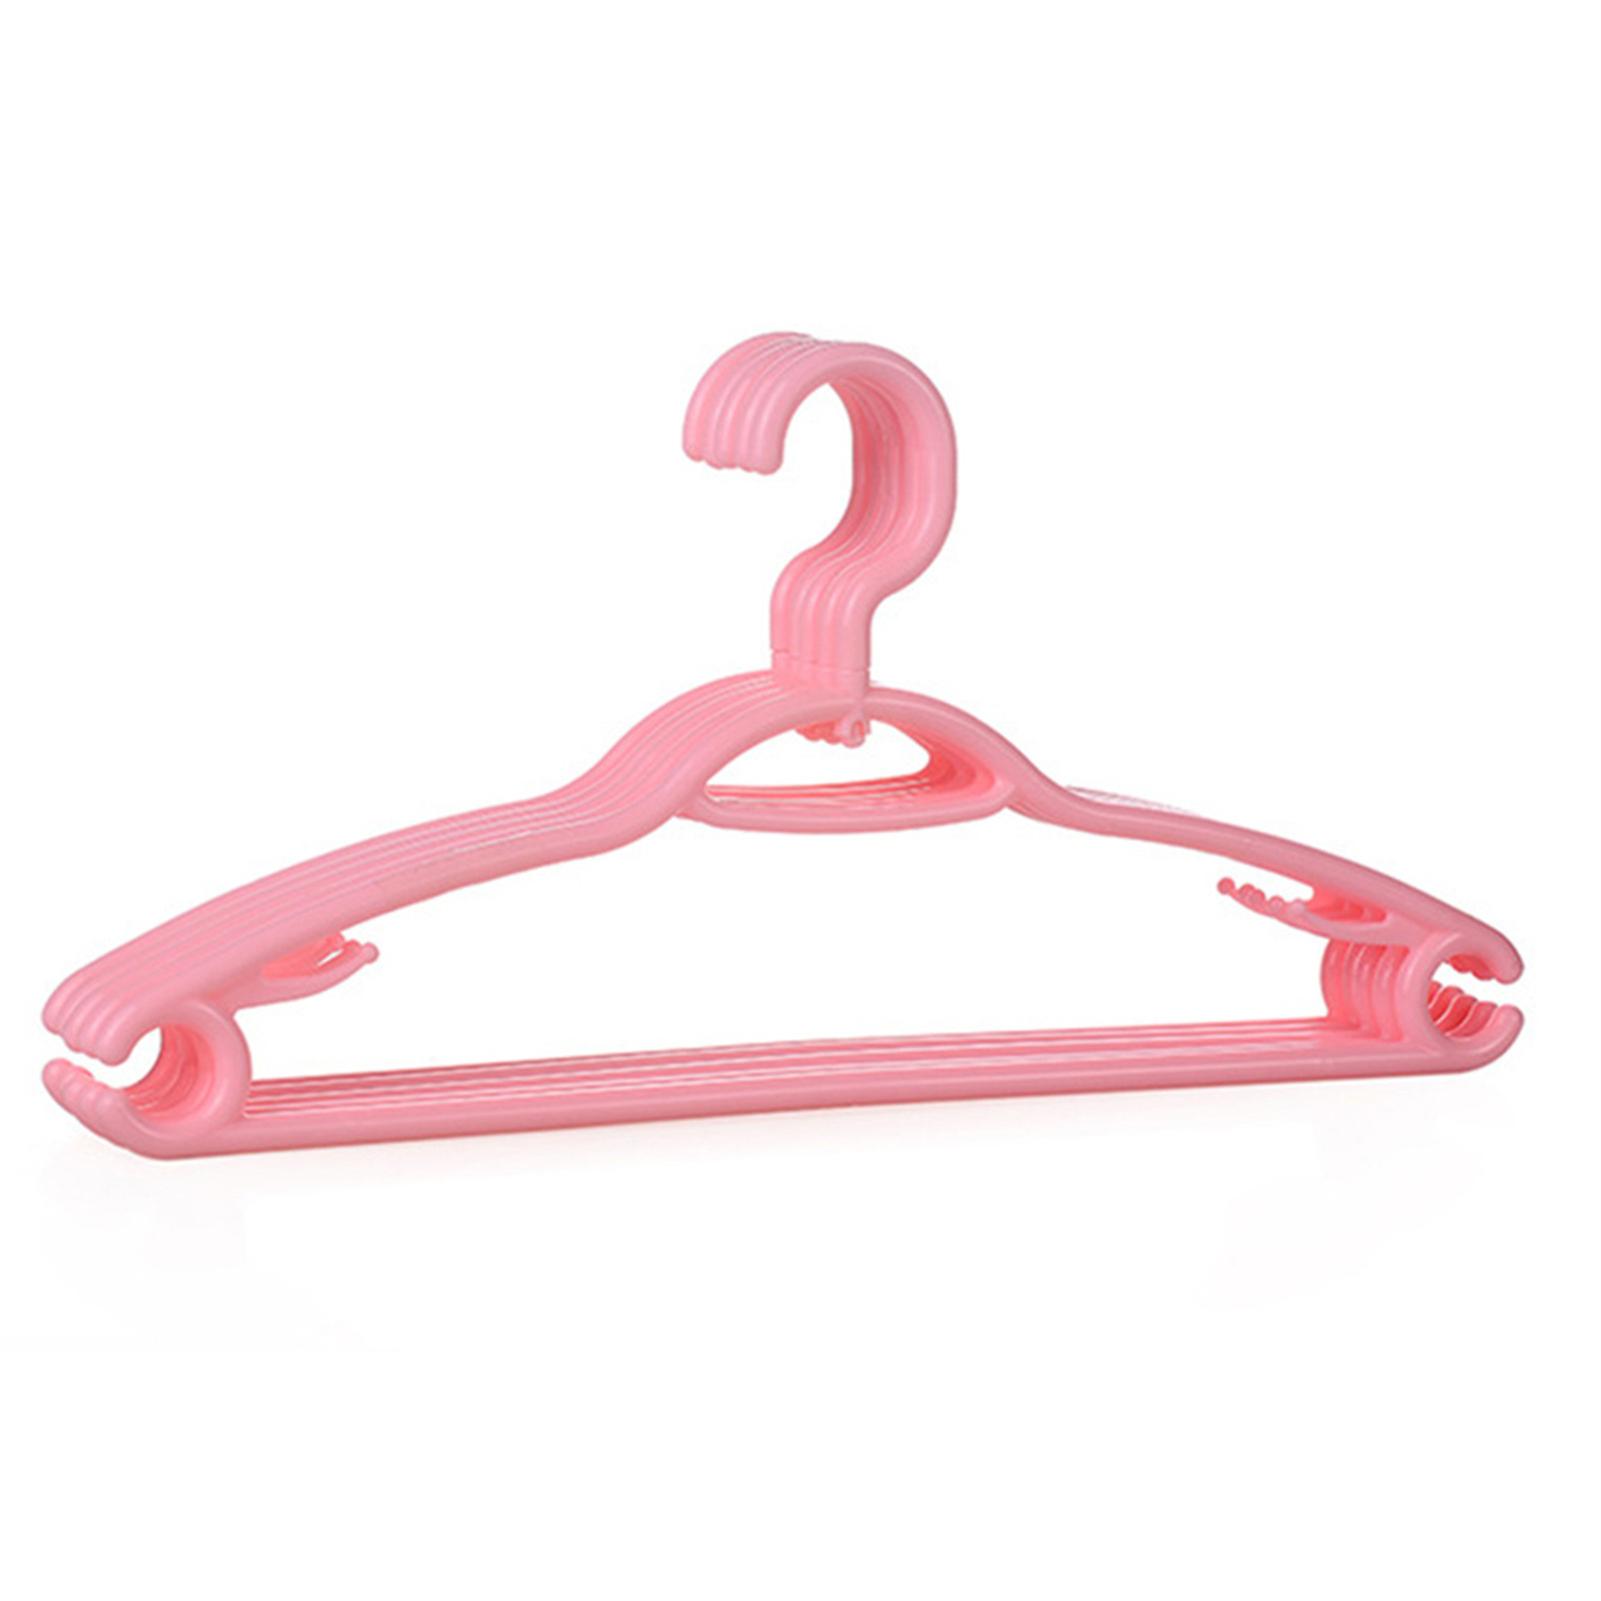 Fashionably Functional: Plastic Clothes Hangers for Style Enthusiasts